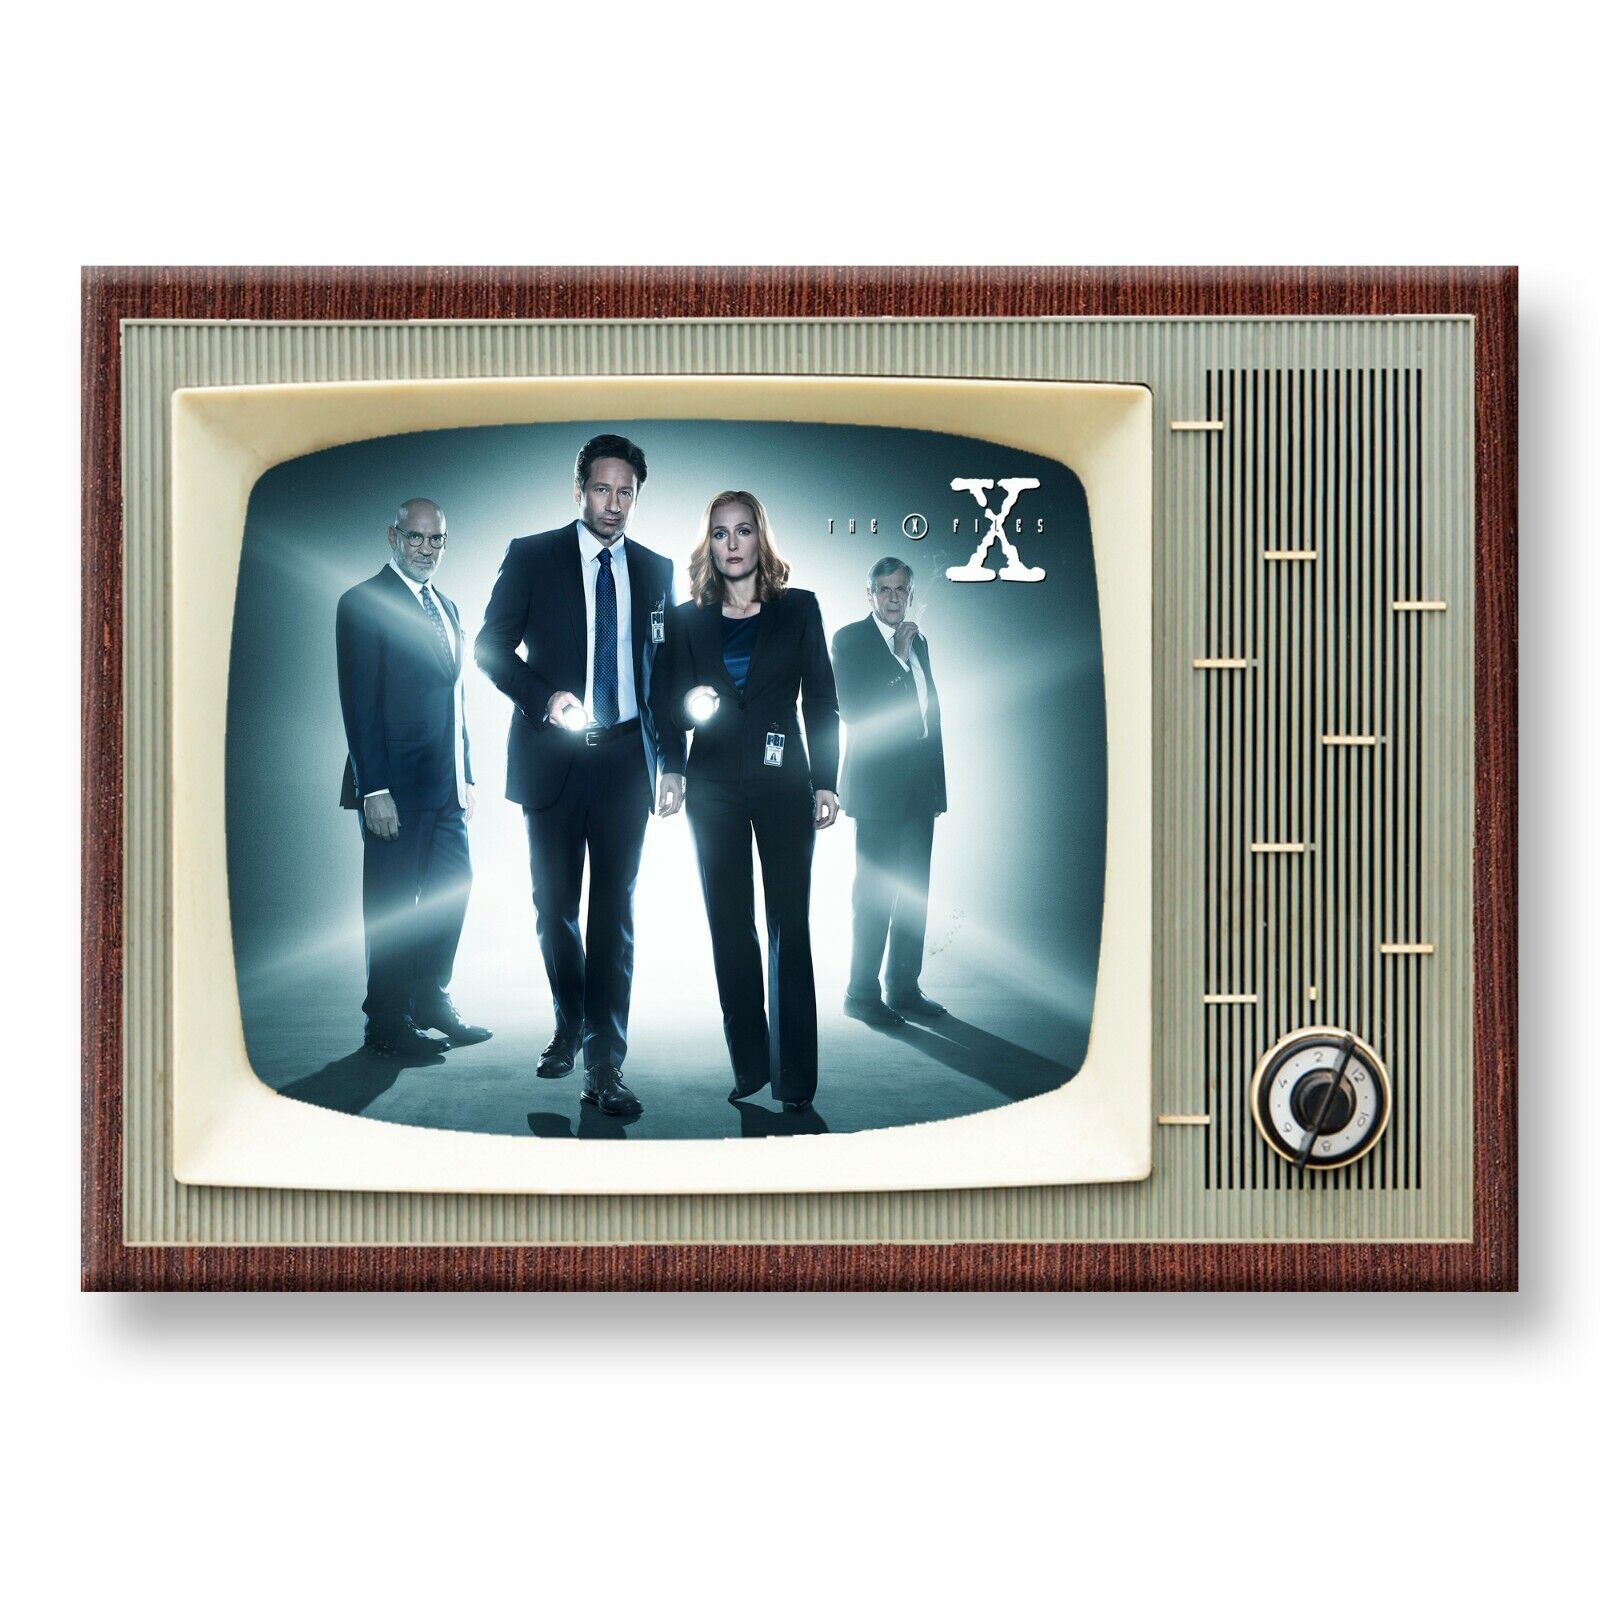 X FILES TV Show Classic TV 3.5 inches x 2.5 inches Steel FRIDGE MAGNET x-FILES